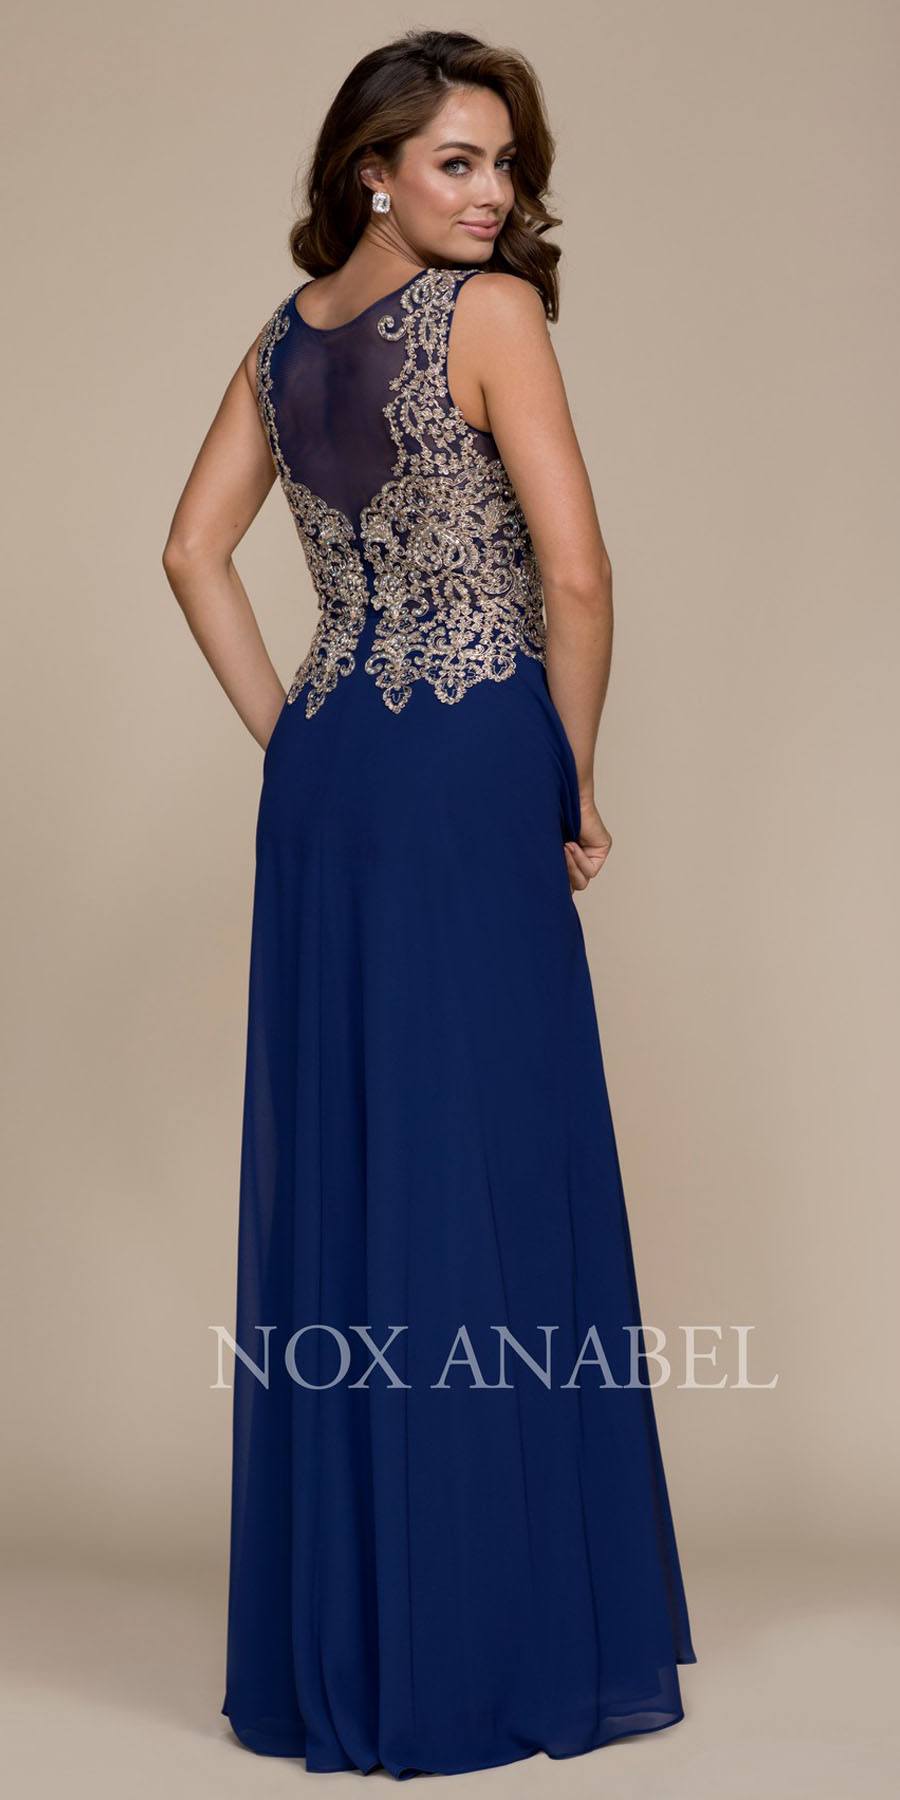 Sleeveless Long Formal Dress Embroidered Bodice Navy Blue-Gold